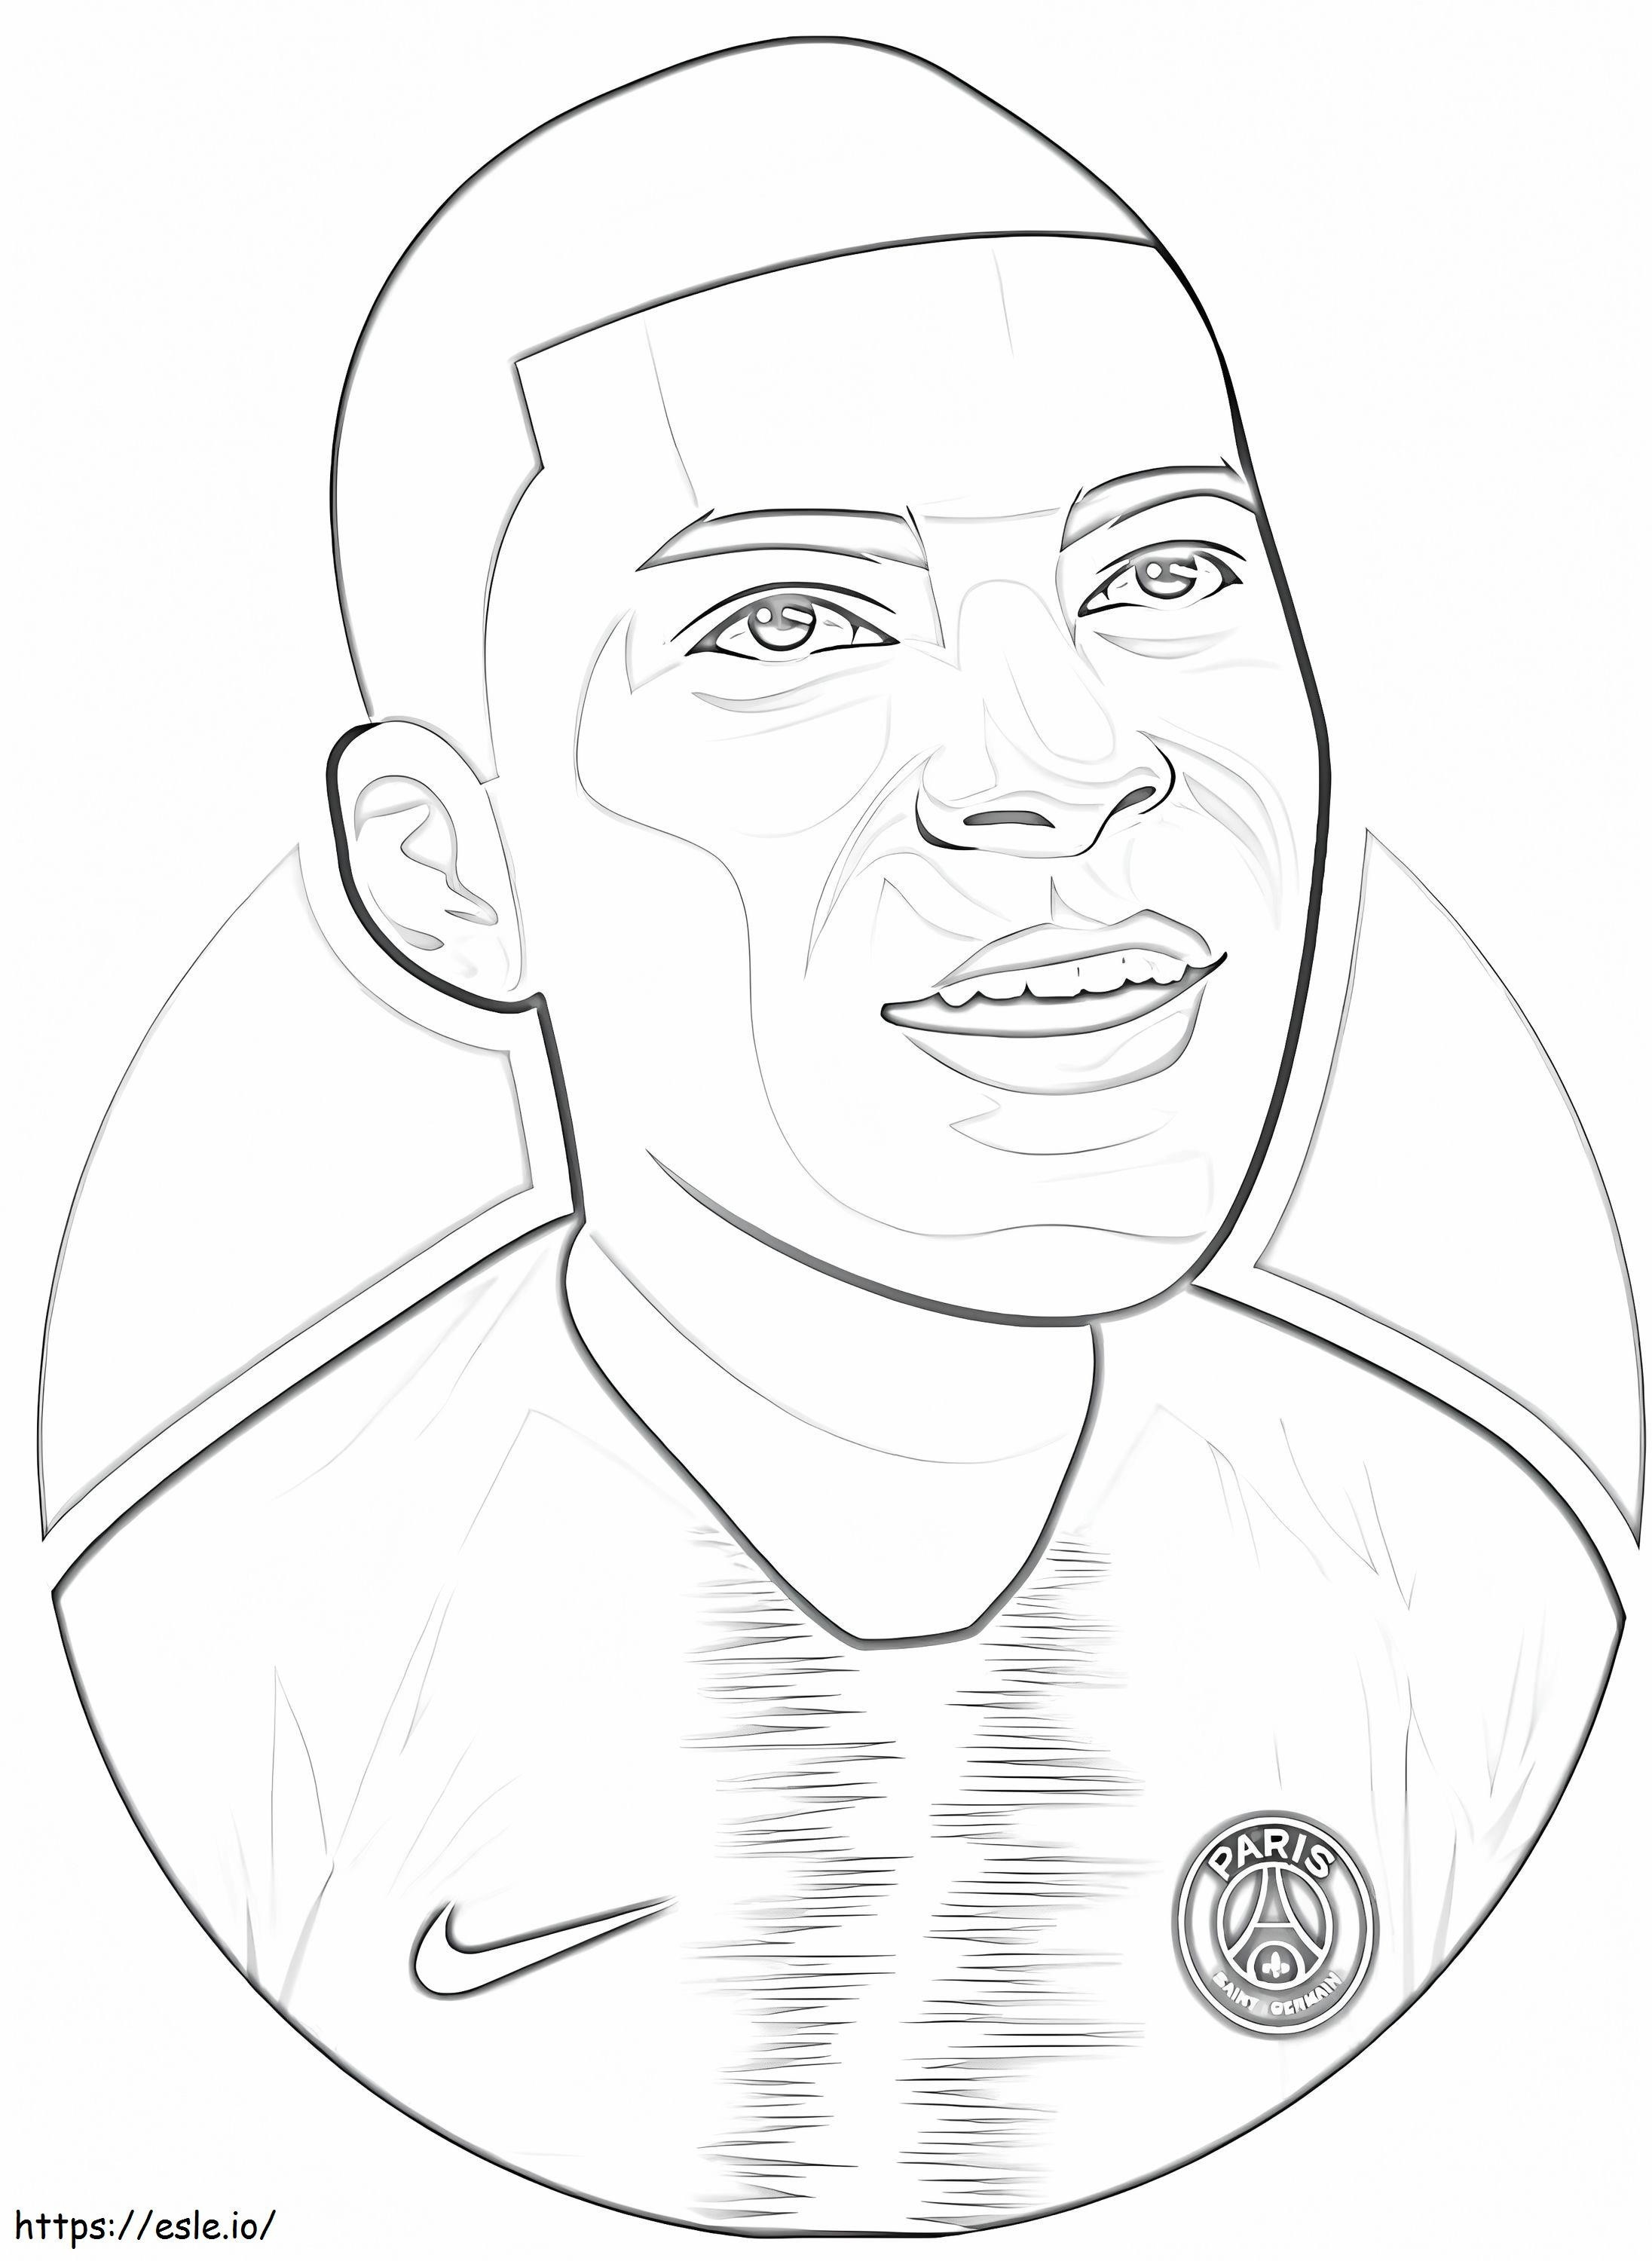 Kylian Mbappe 5 coloring page